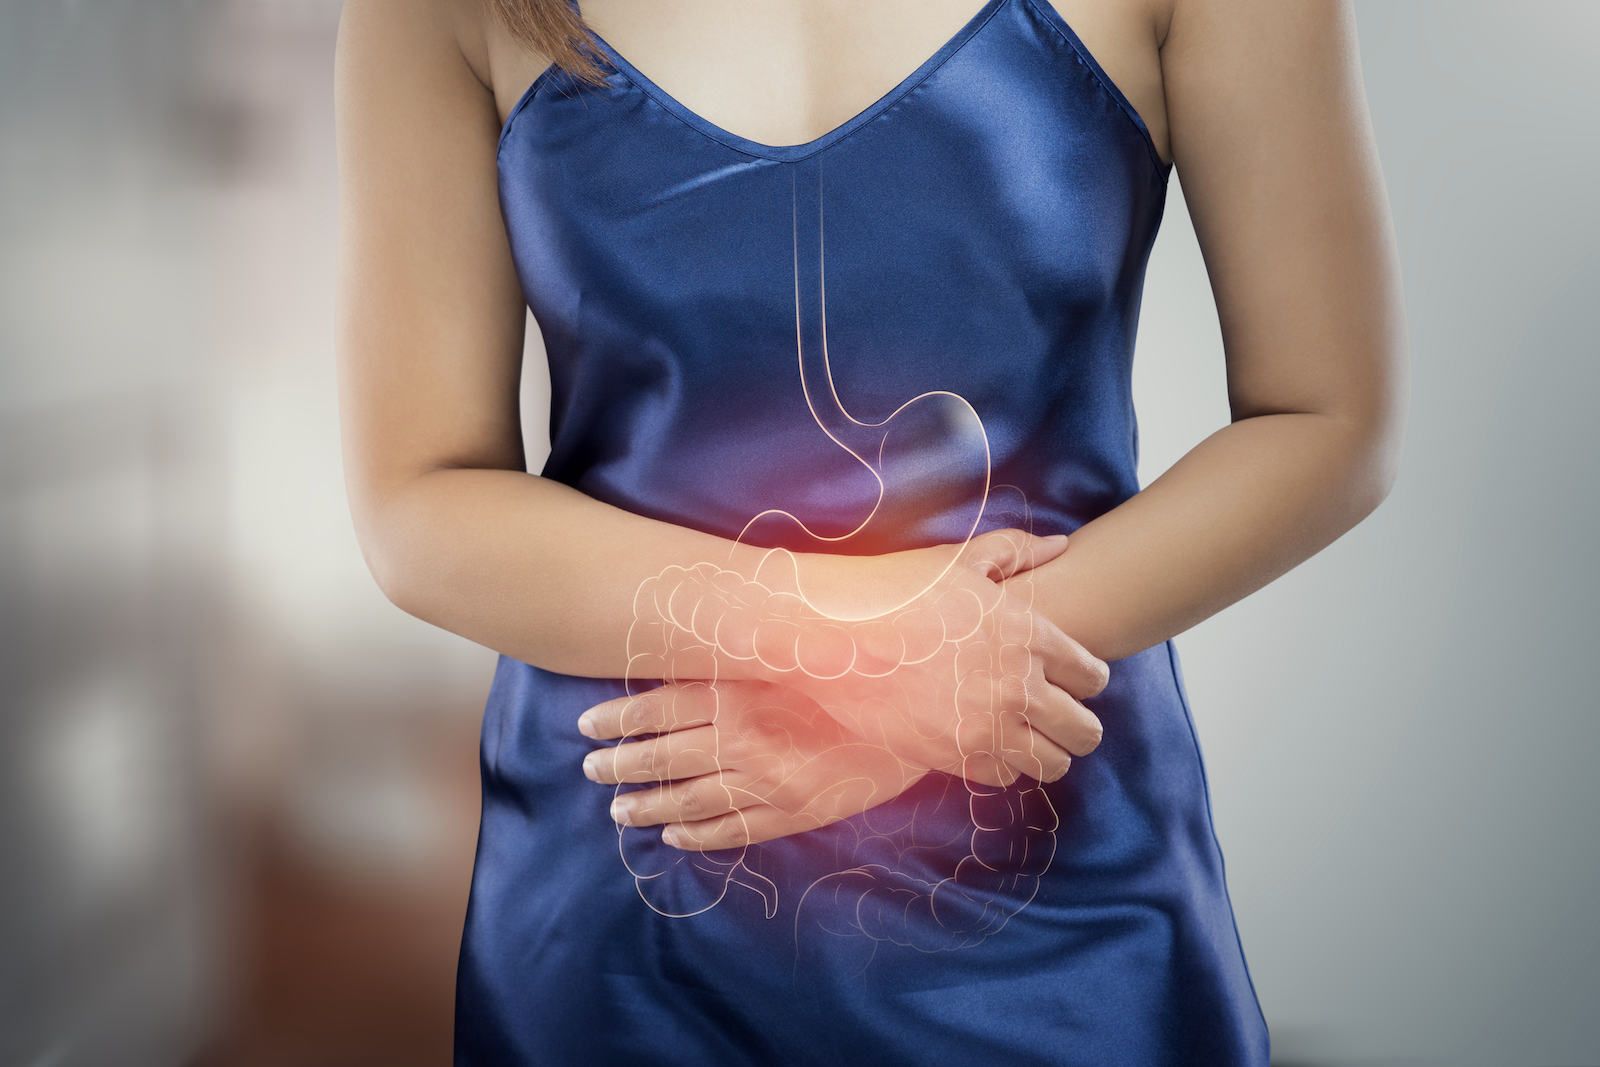 colon pain: Illustration of the large intestine against an image of a woman clutching her stomach in pain